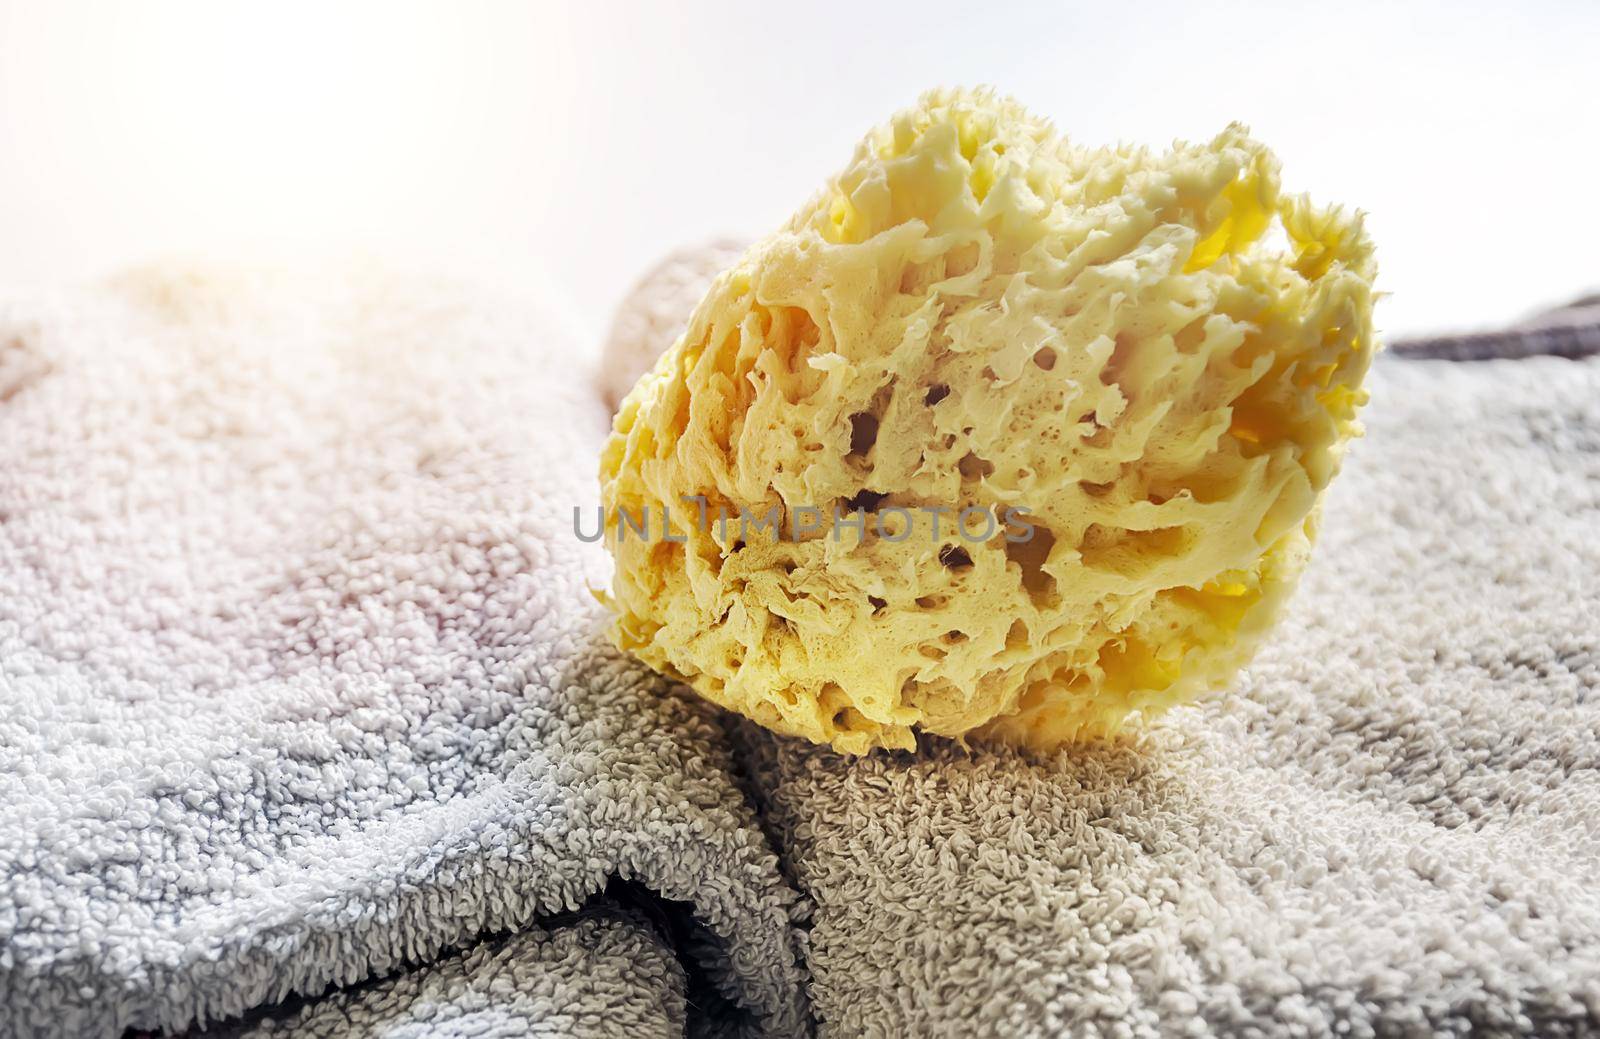 Natural yellow sponge on stacked towels by rarrarorro